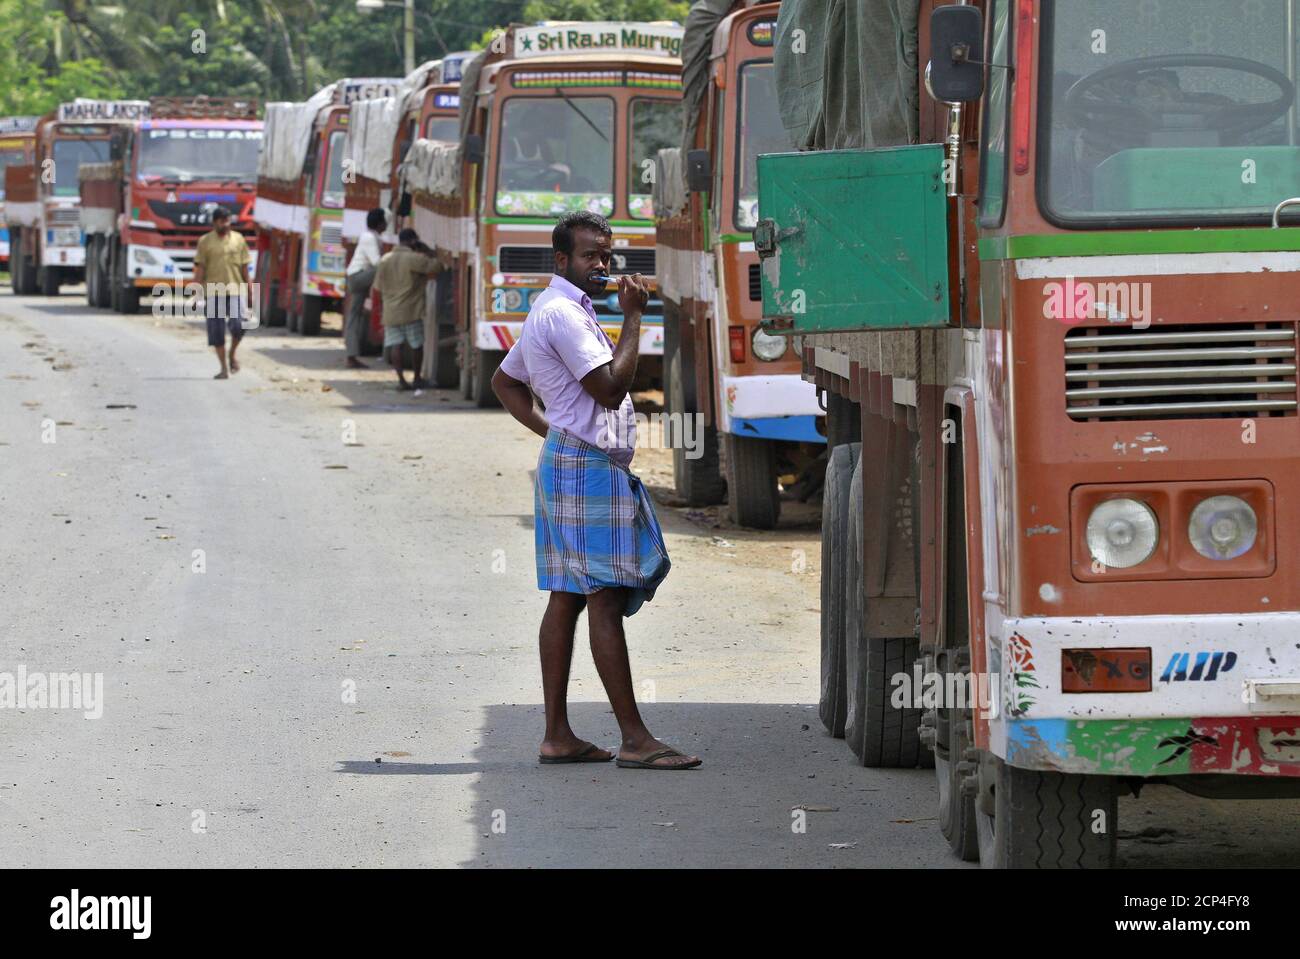 A truck driver brushes his teeth next to his parked truck while waiting to get his loads cleared to cross a checkpoint at the Commercial Taxes Department check post at Walayar in Palakkad district in southern Indian state of Kerala, India, September 5, 2015.  At the Walayar checkpoint in southern India, lines of idle trucks stretch as far as the eye can see in both directions along the tree-lined interstate highway, waiting for clearance from tax inspectors that can take days to complete. The rollout of a nationwide goods and services tax (GST) from April was supposed to sweep away hundreds of Stock Photo